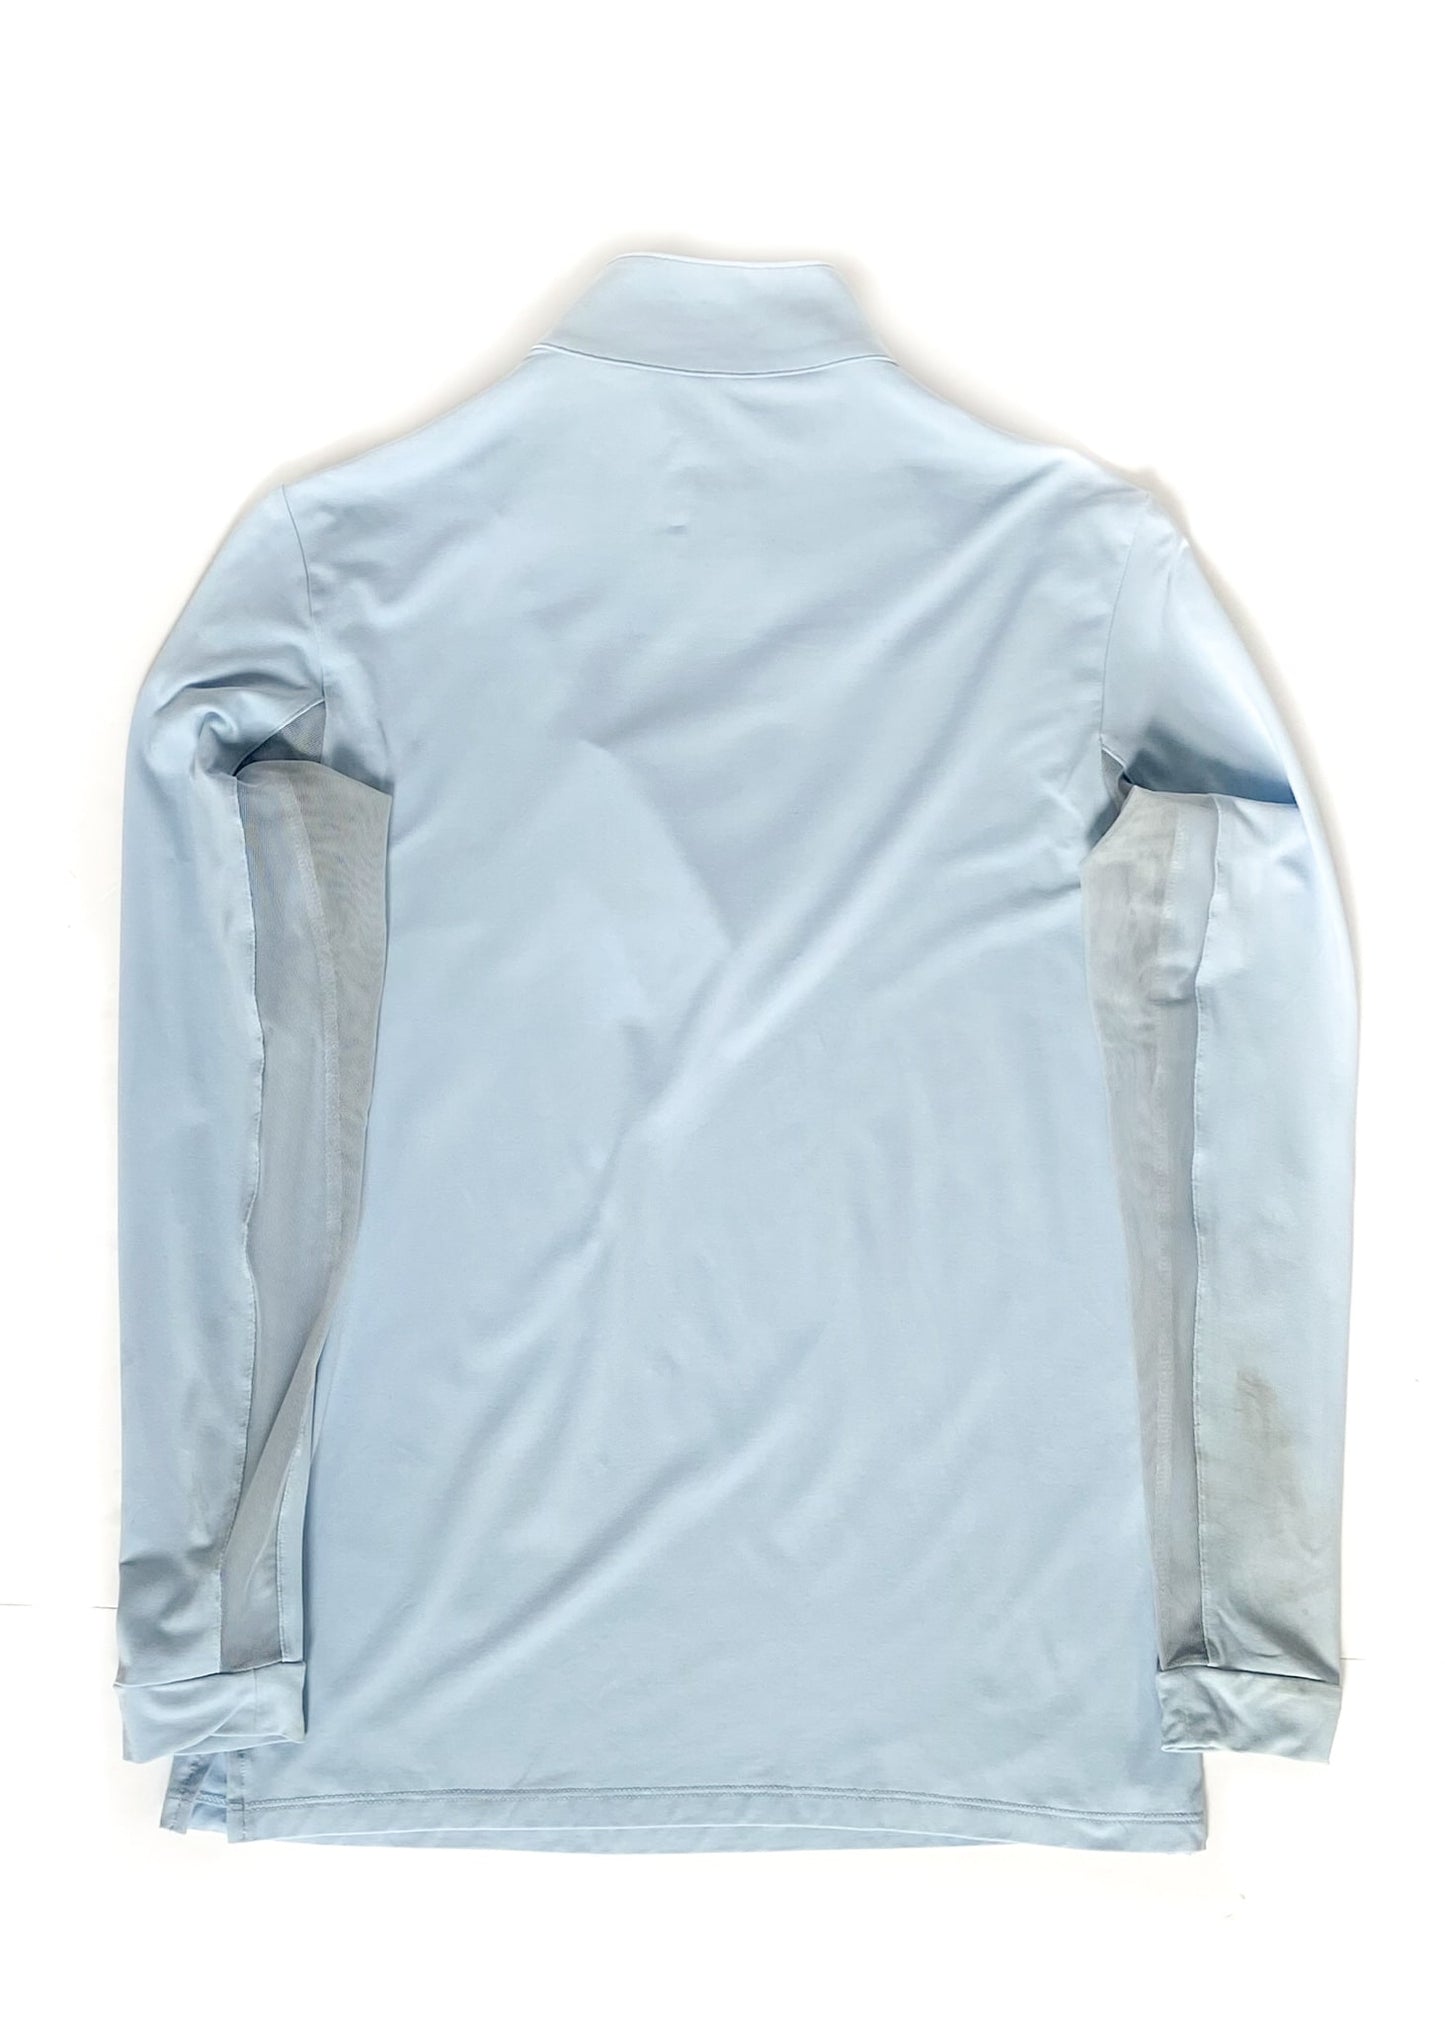 Tailored Sportsman Long Sleeve Icefil Shirt - Baby Blue - Women's Small